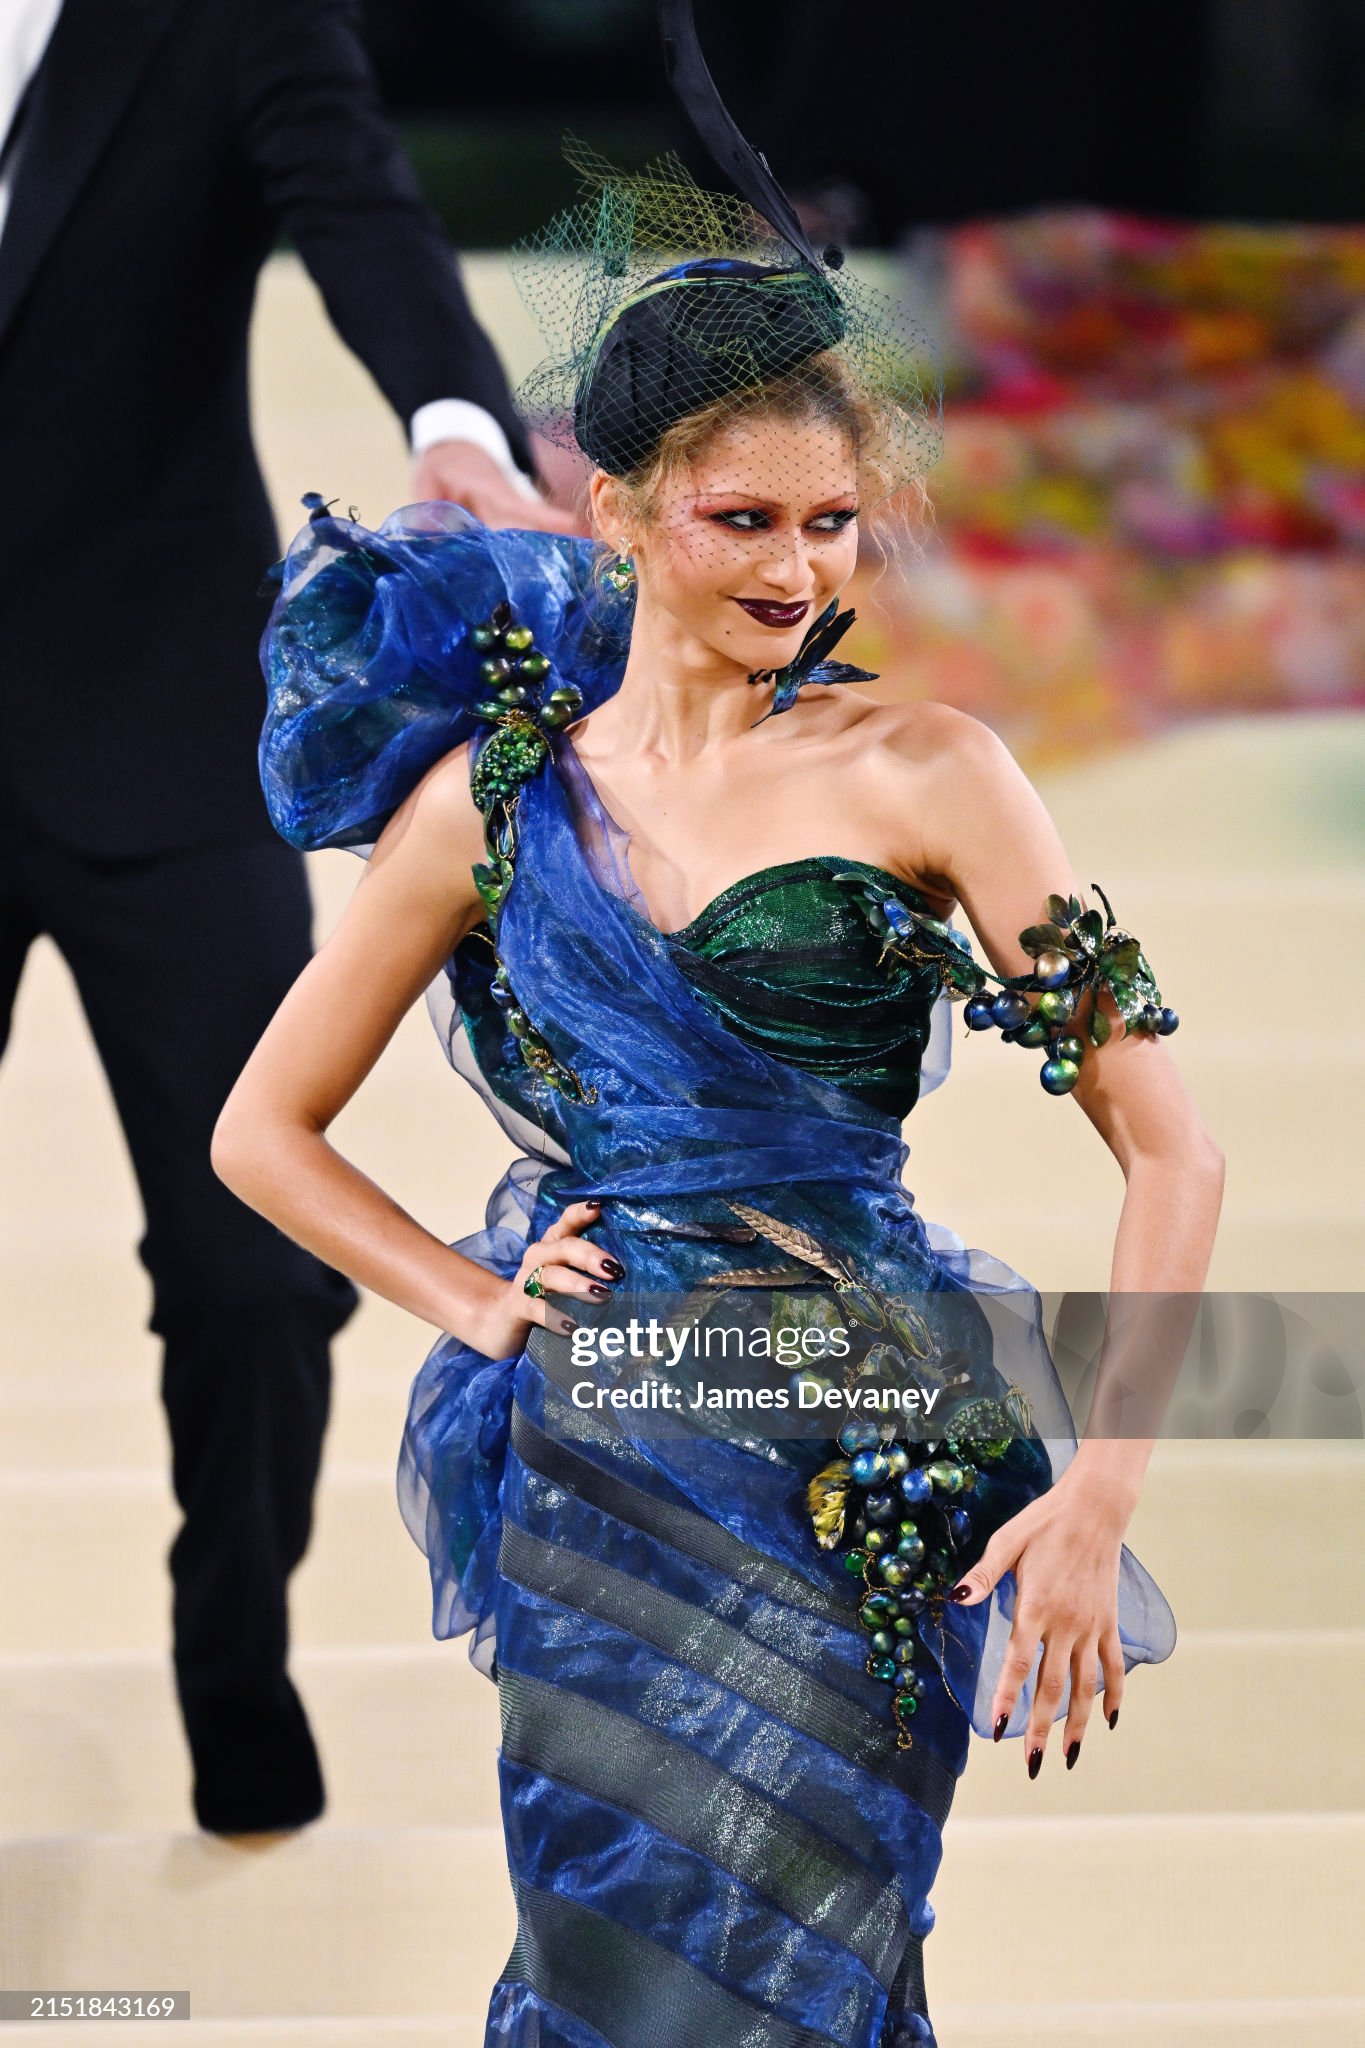 gettyimages-2151843169-2048x2048.jpg